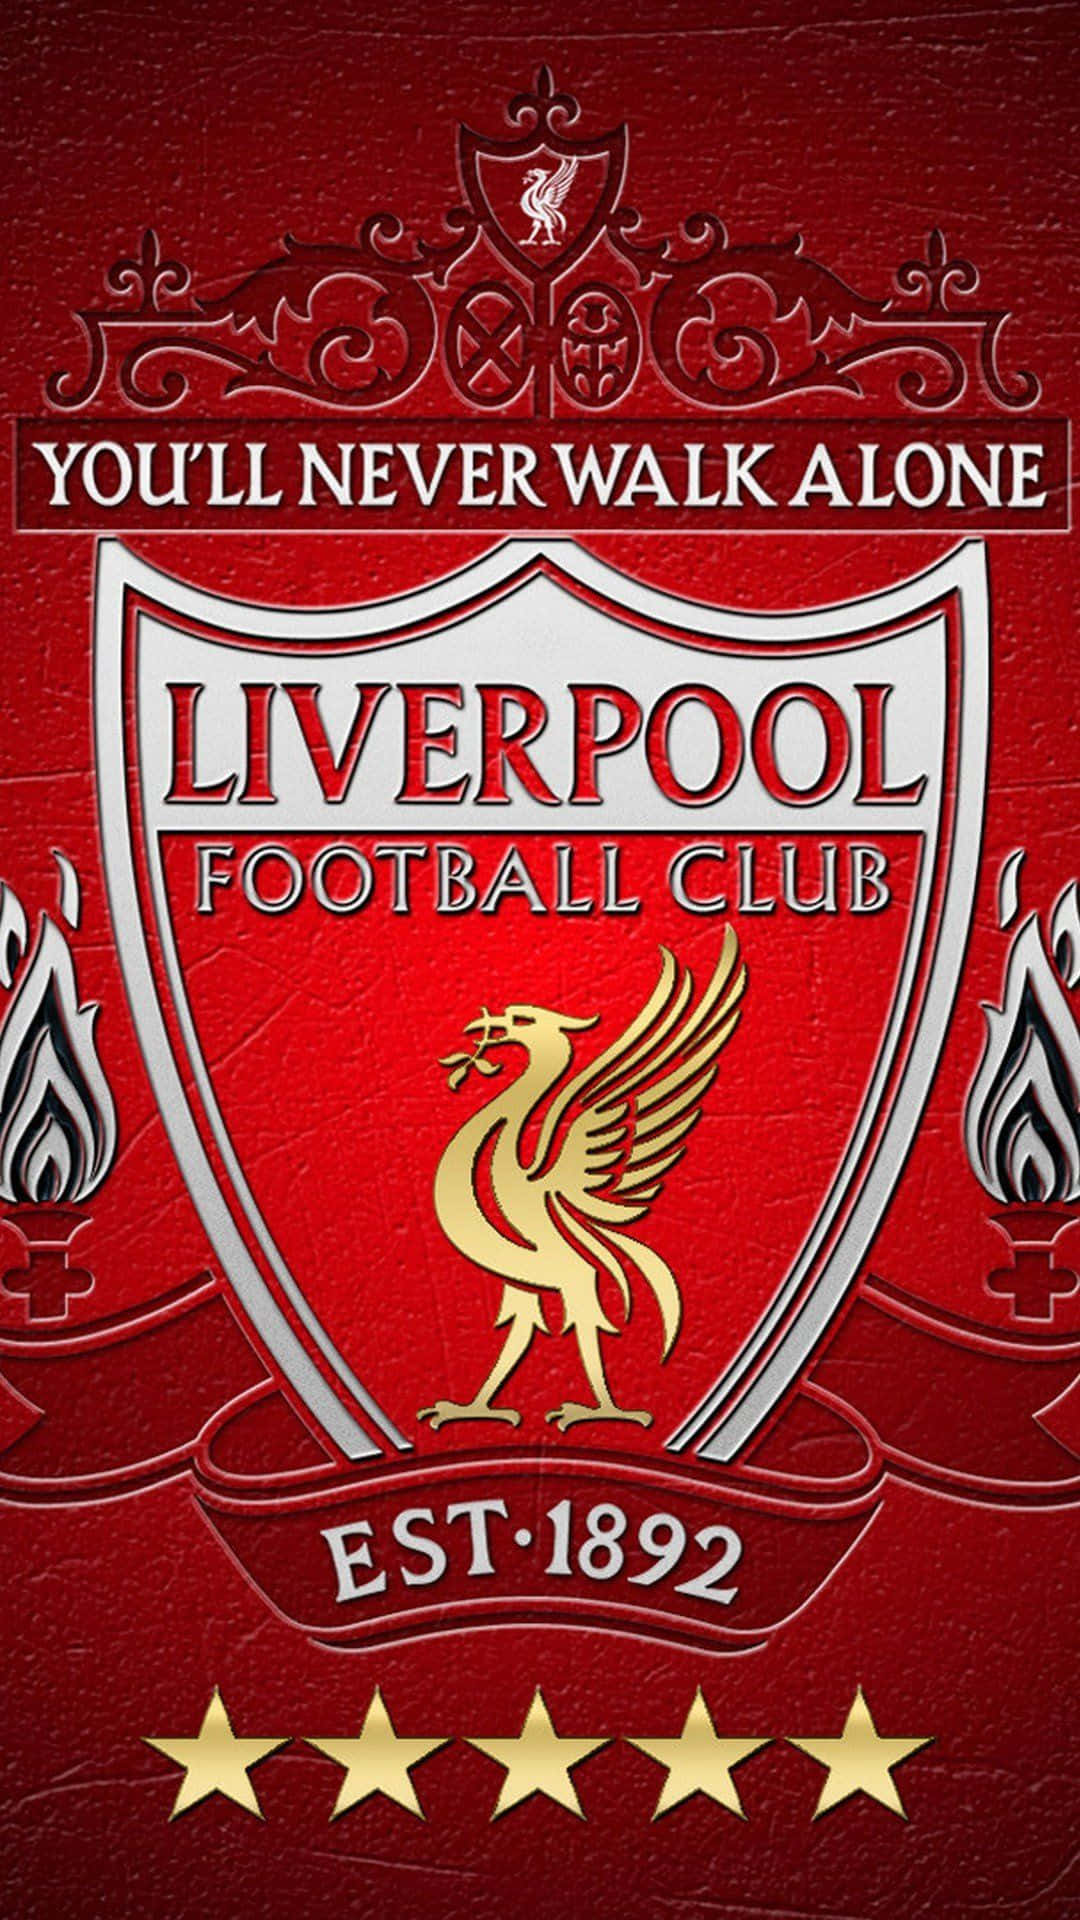 Show off your Liverpool FC pride with this logo wallpaper for iPhone! Wallpaper